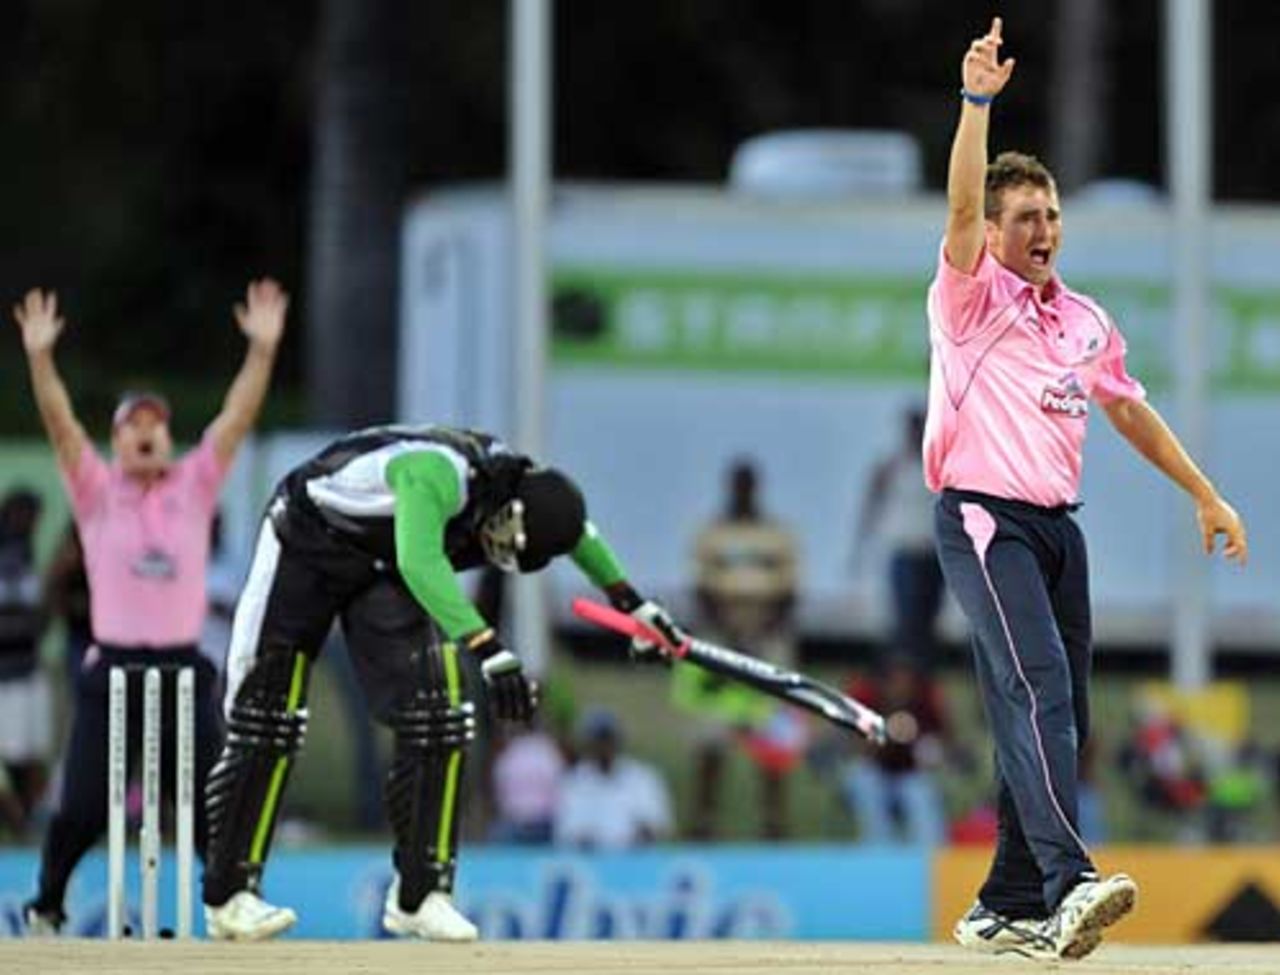 Tim Murtagh traps Chris Gayle lbw in the first over, Stanford Superstars v Middlesex, Antigua, October 30, 2008